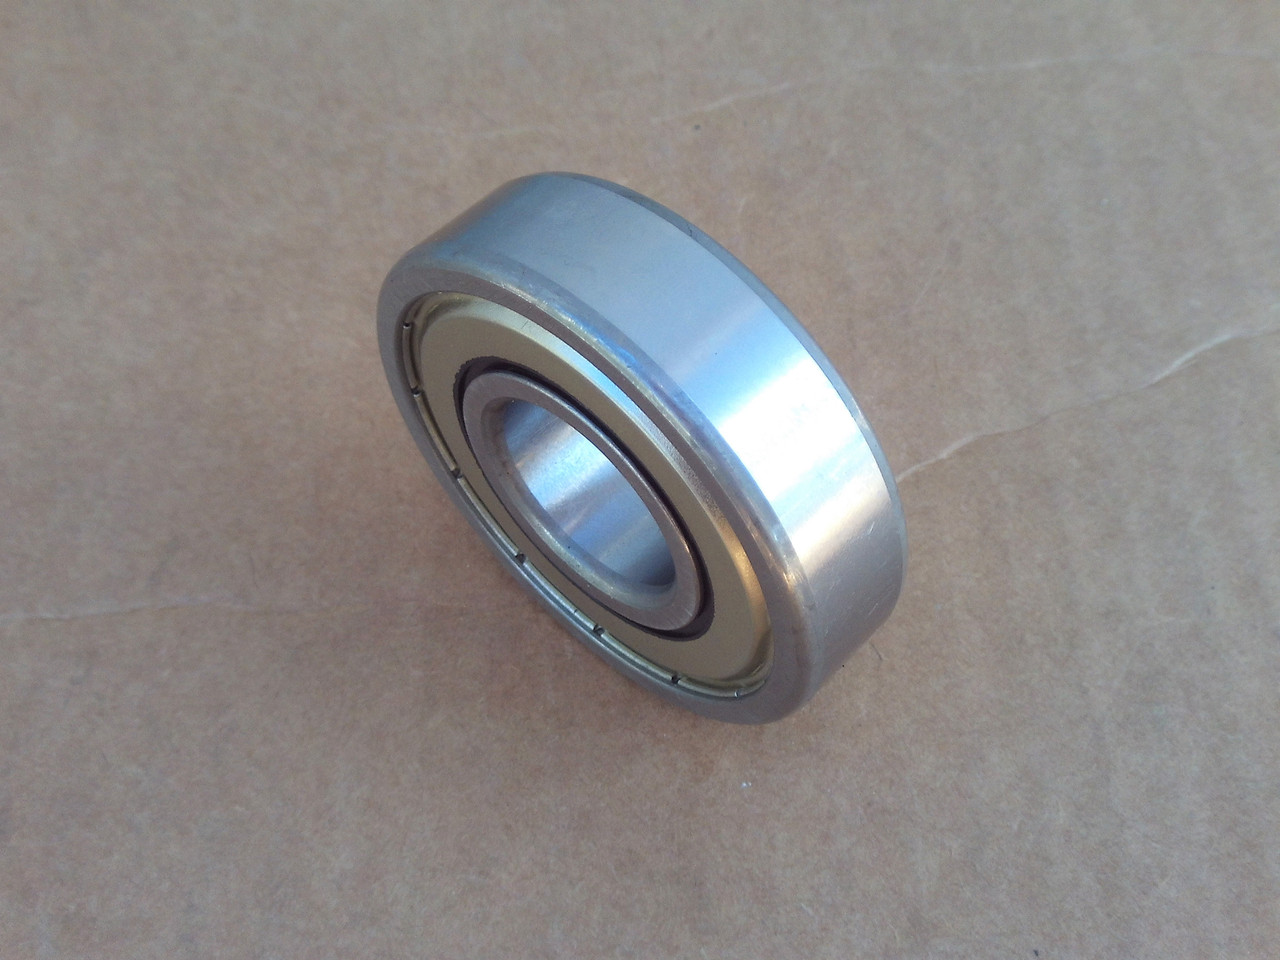 Spindle Bearing for Kees 363173, 919125 ID: 0.984"= 1" OD: 2.44"= 2-3/8" Height: 0.669= 5/8"